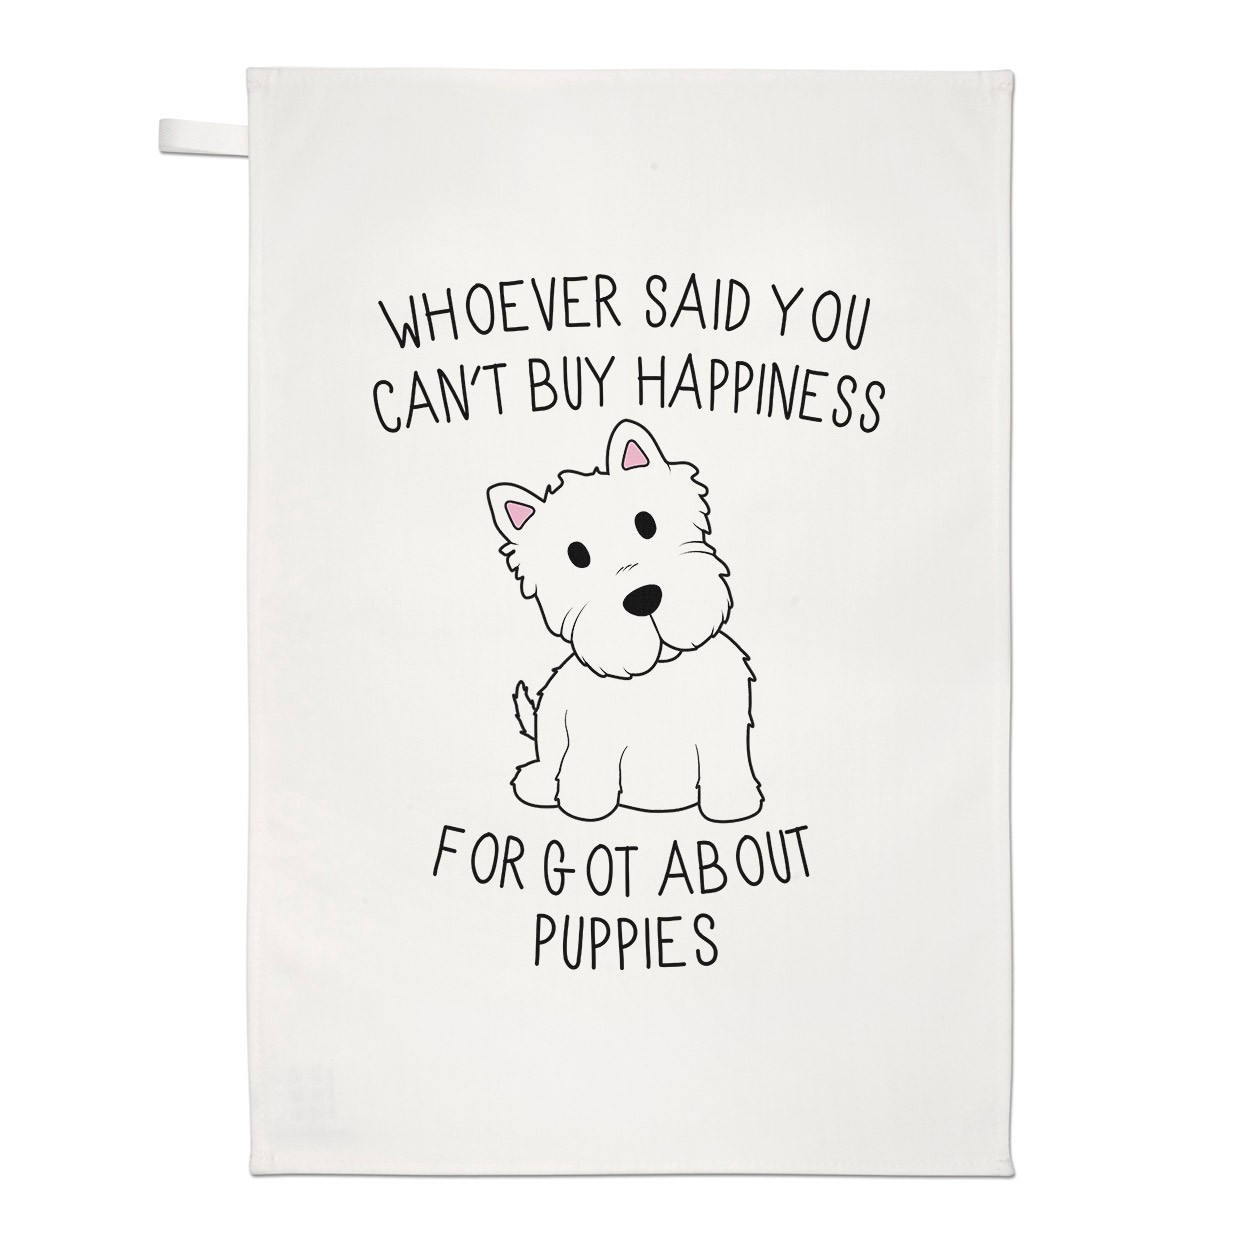 Whoever Said You Can't Buy Happiness Forgot About Puppies Tea Towel Dish Cloth